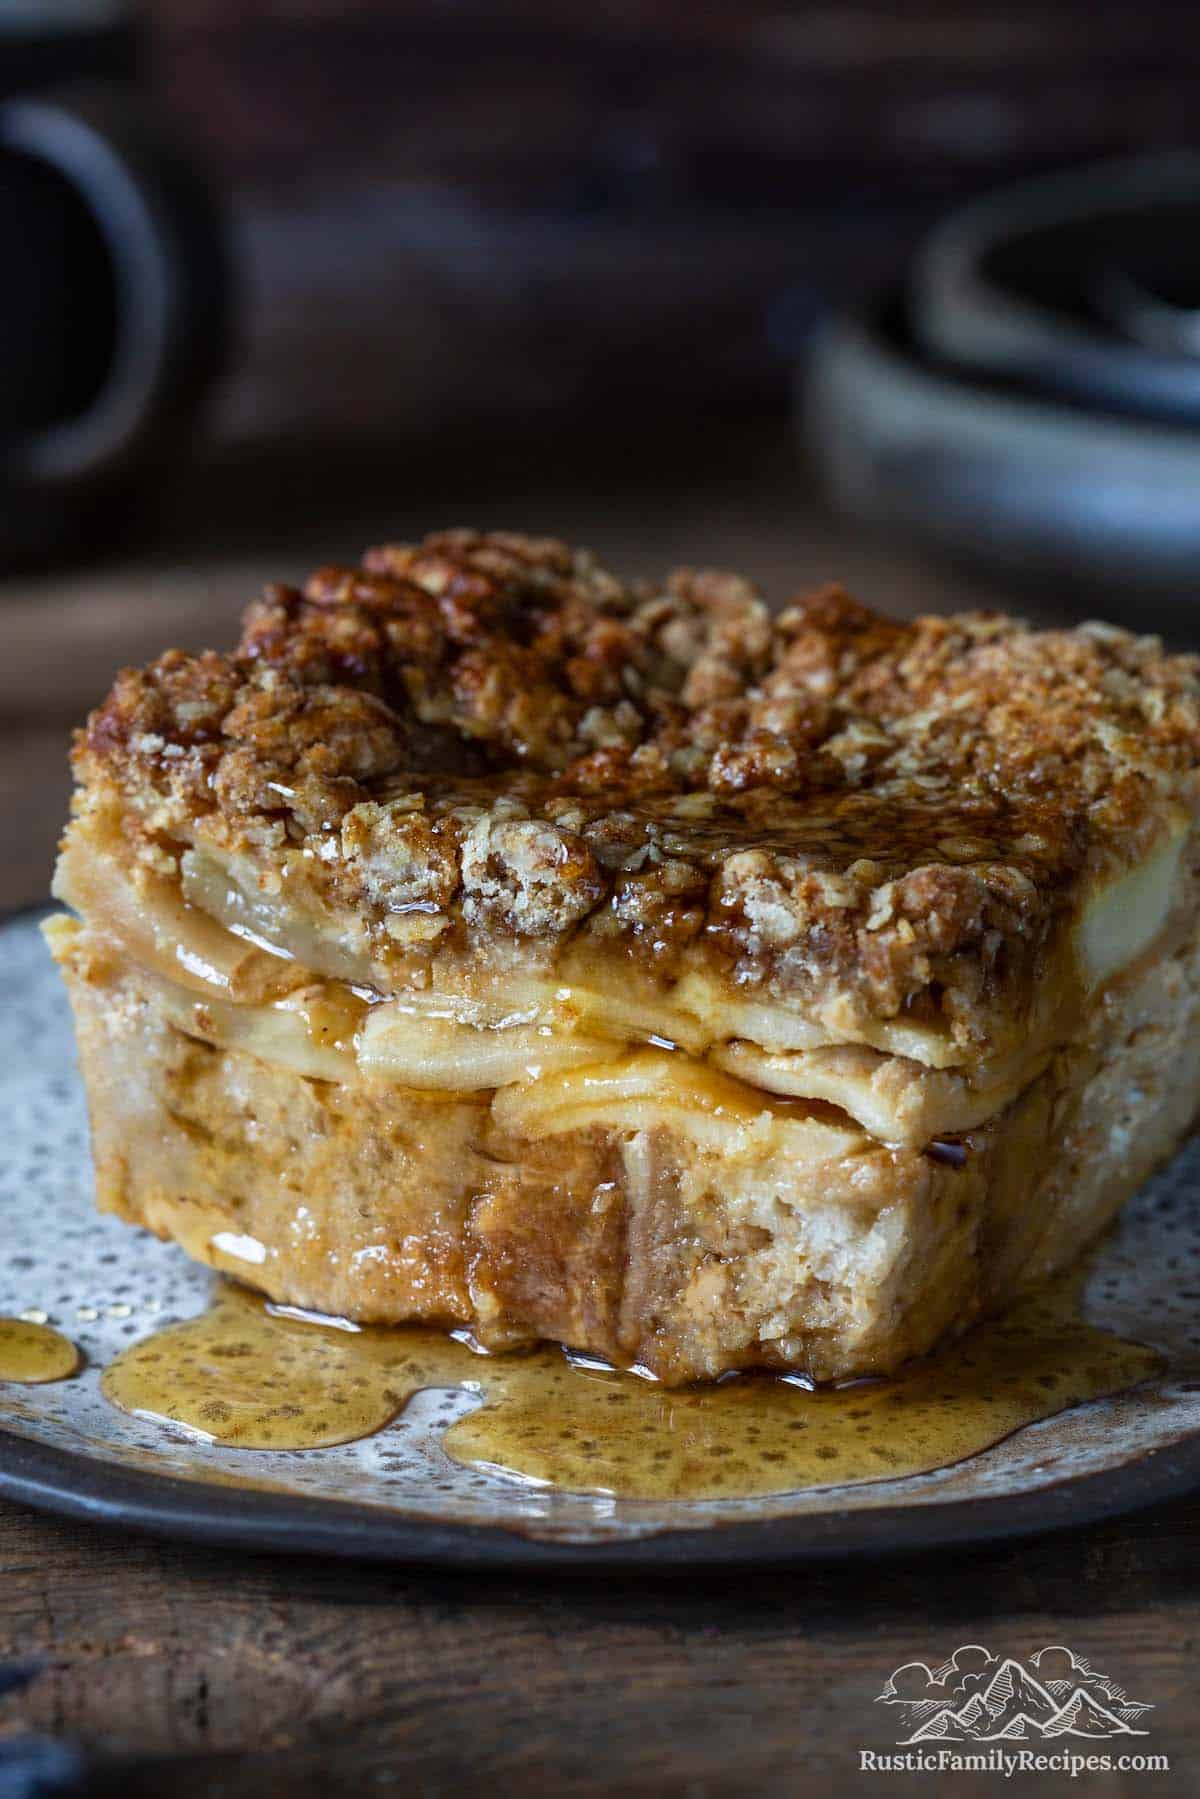 A slice of french toast casserole drenched in maple syrup